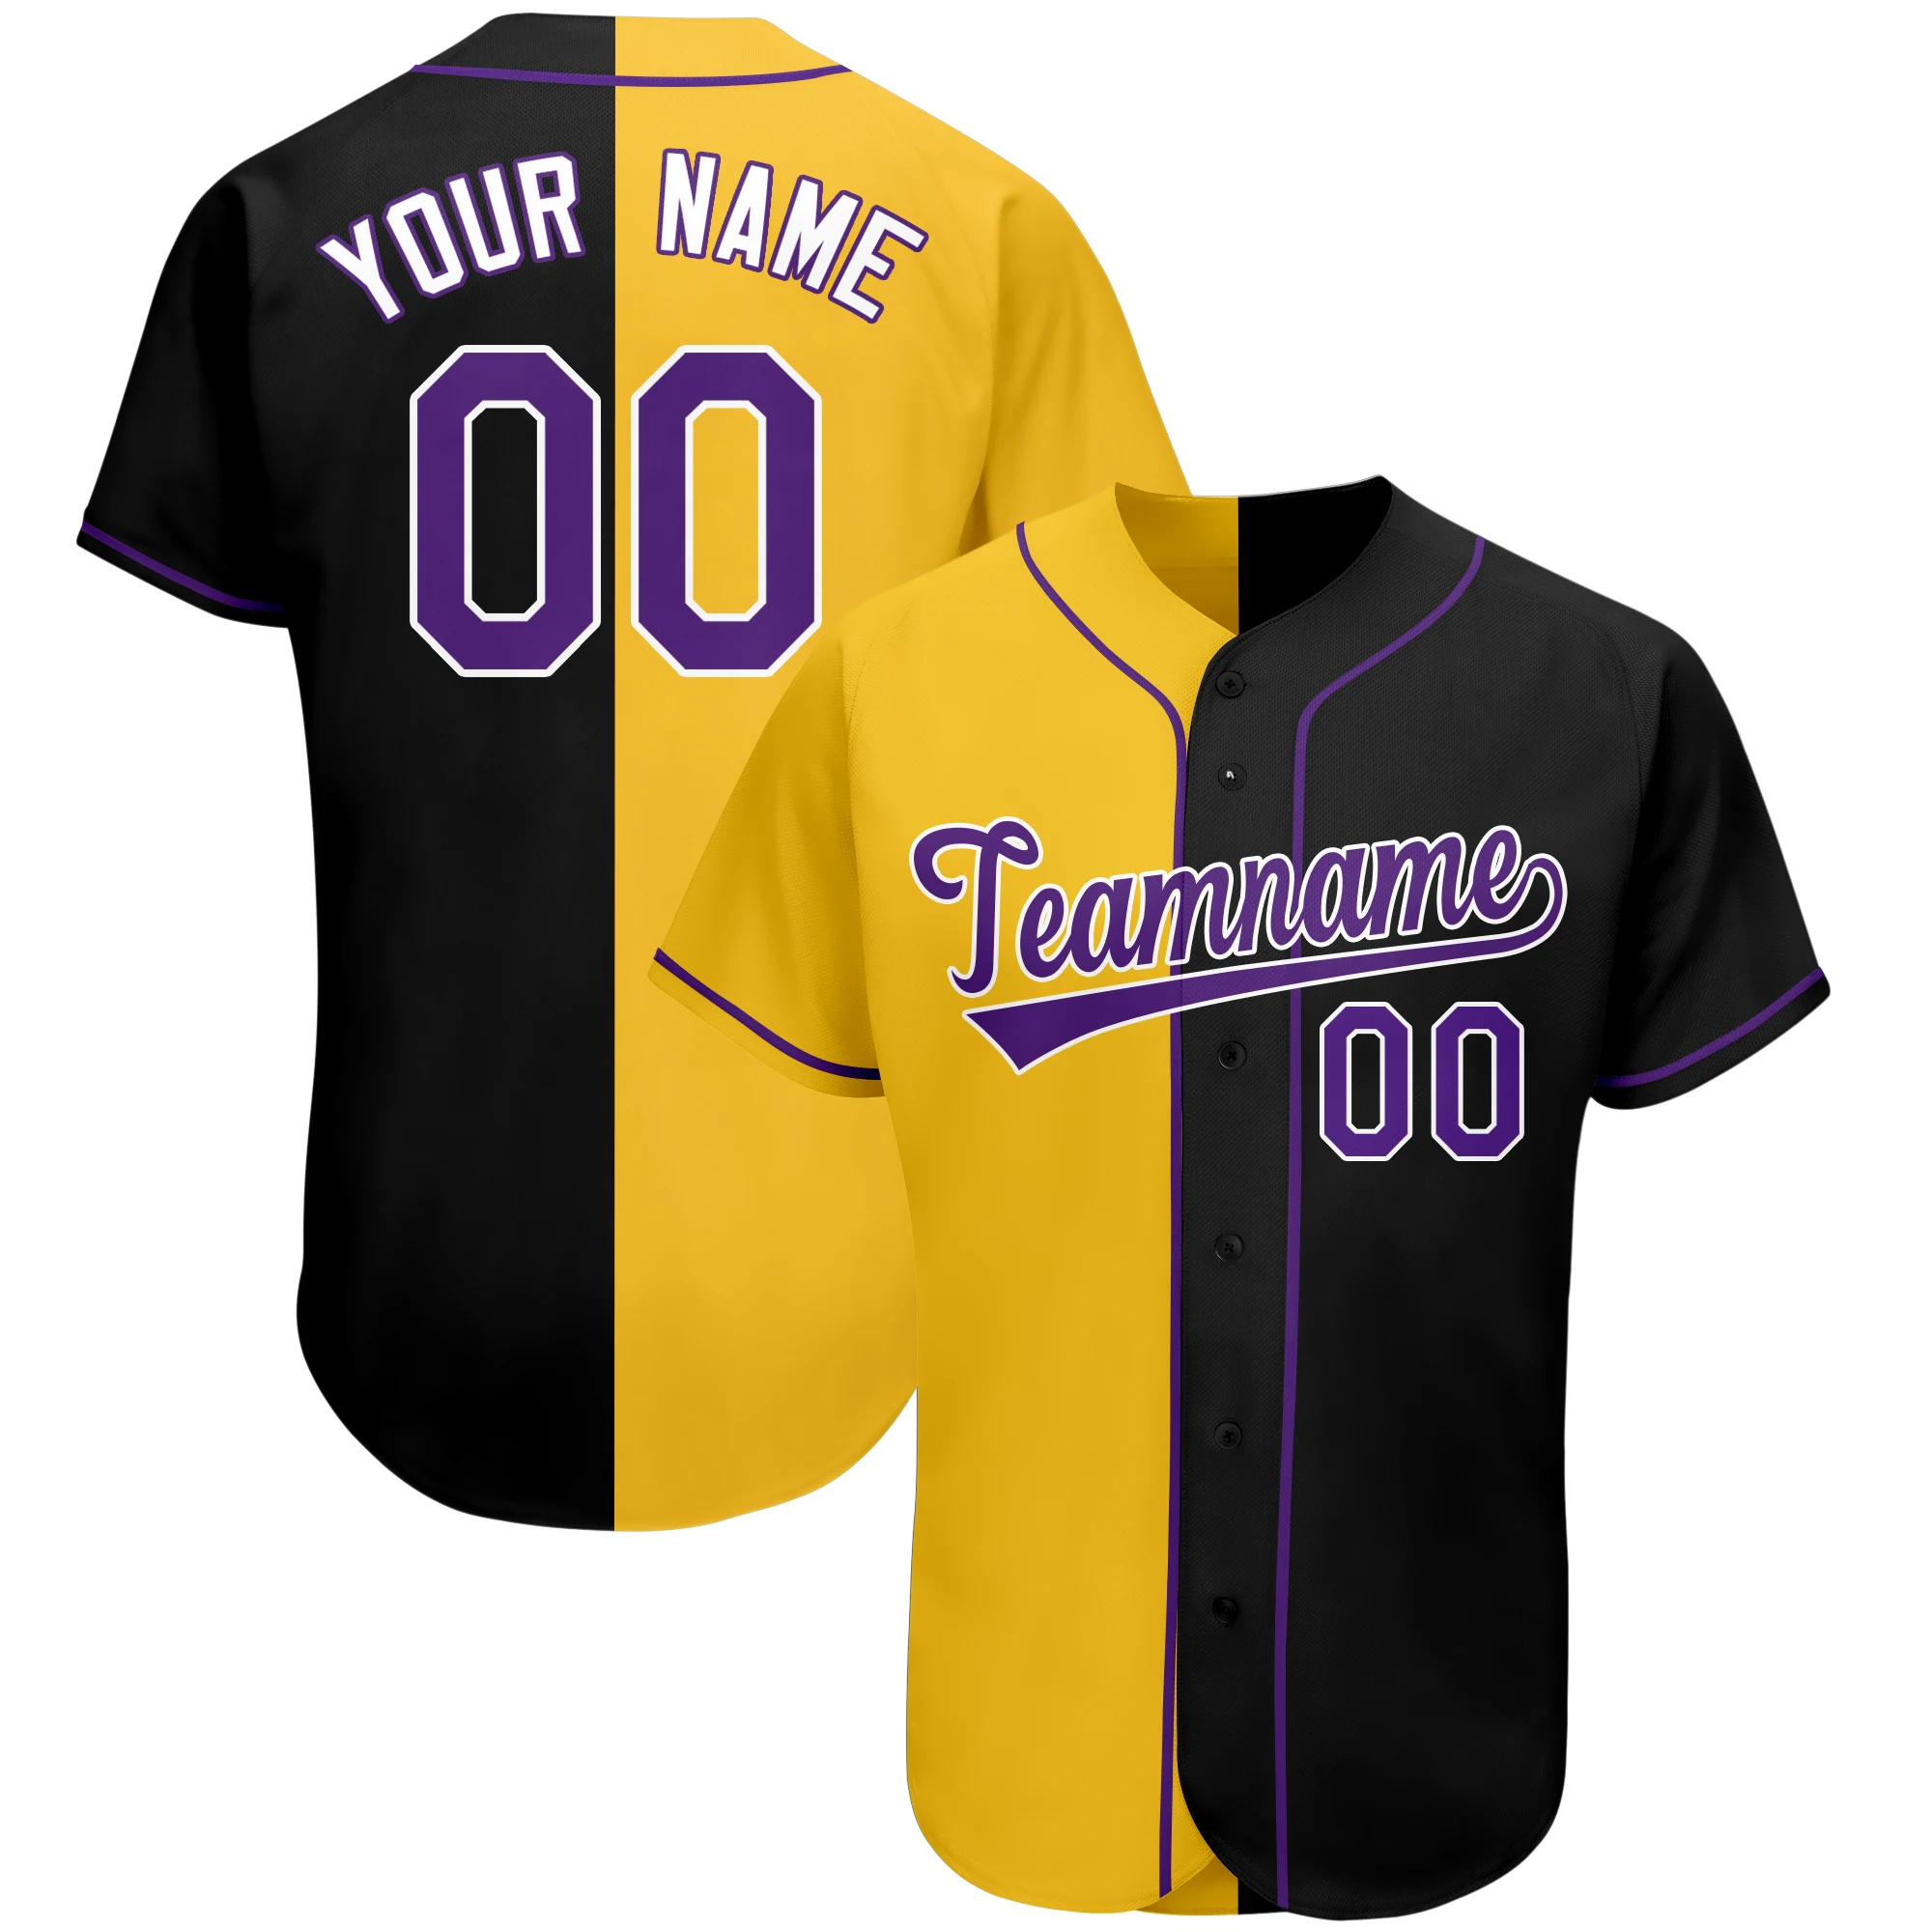 

Customize Baseball Jersey Printed Your Name/Number Active Training Any Color Softball Uniform for Adults/Kids outdoors Big size